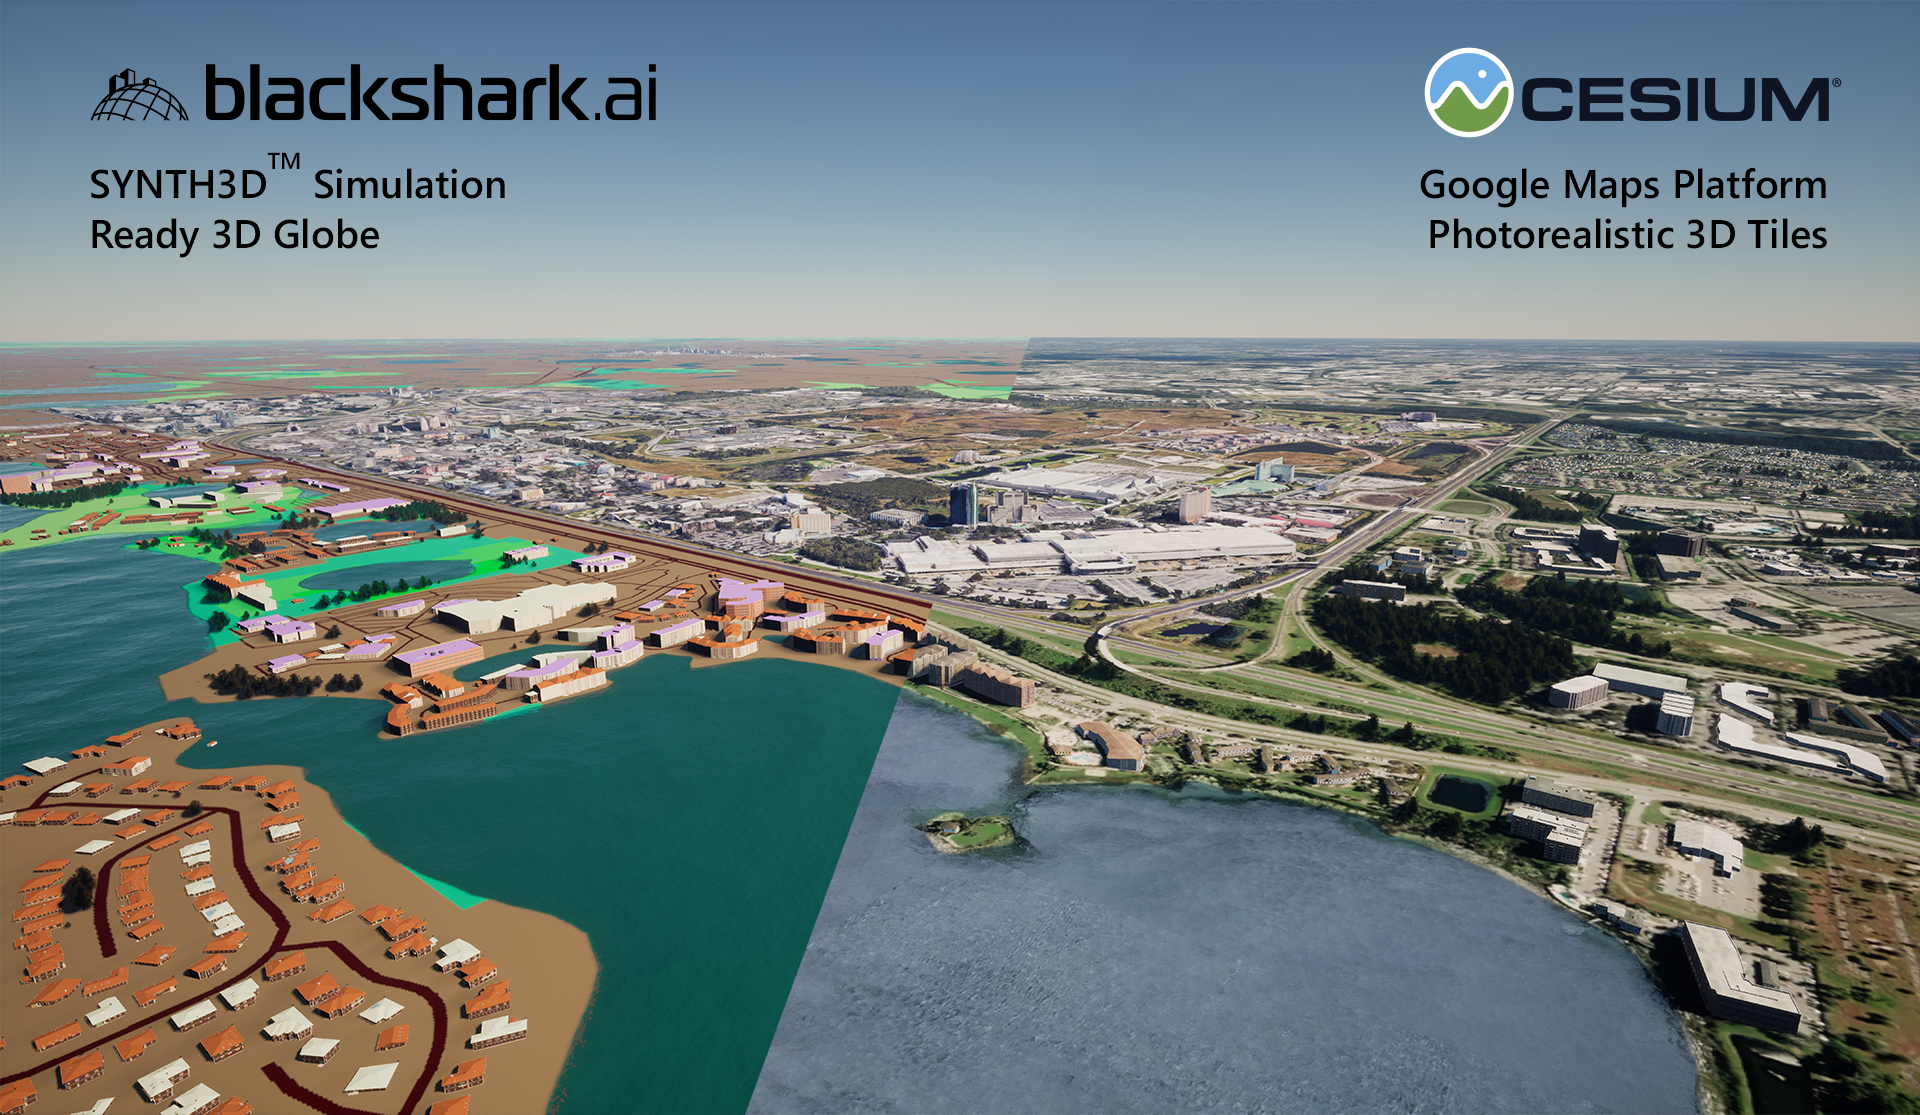 Blackshark.ai and Cesium Enhance Geospatial Modeling with SYNTH3D Support for 3D Tiles